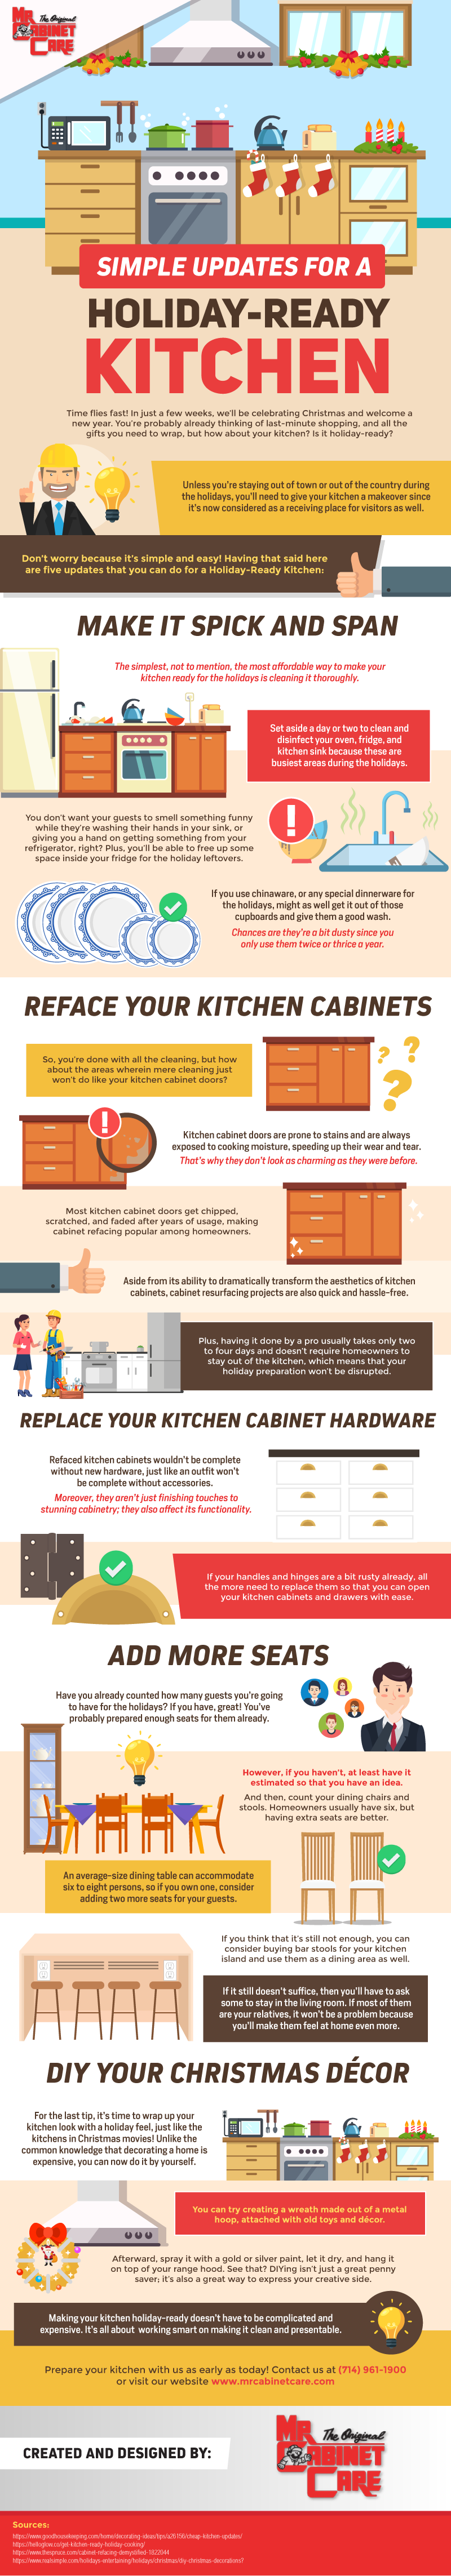 Simple Updates for a Holiday-Ready Kitchen (Infographic)